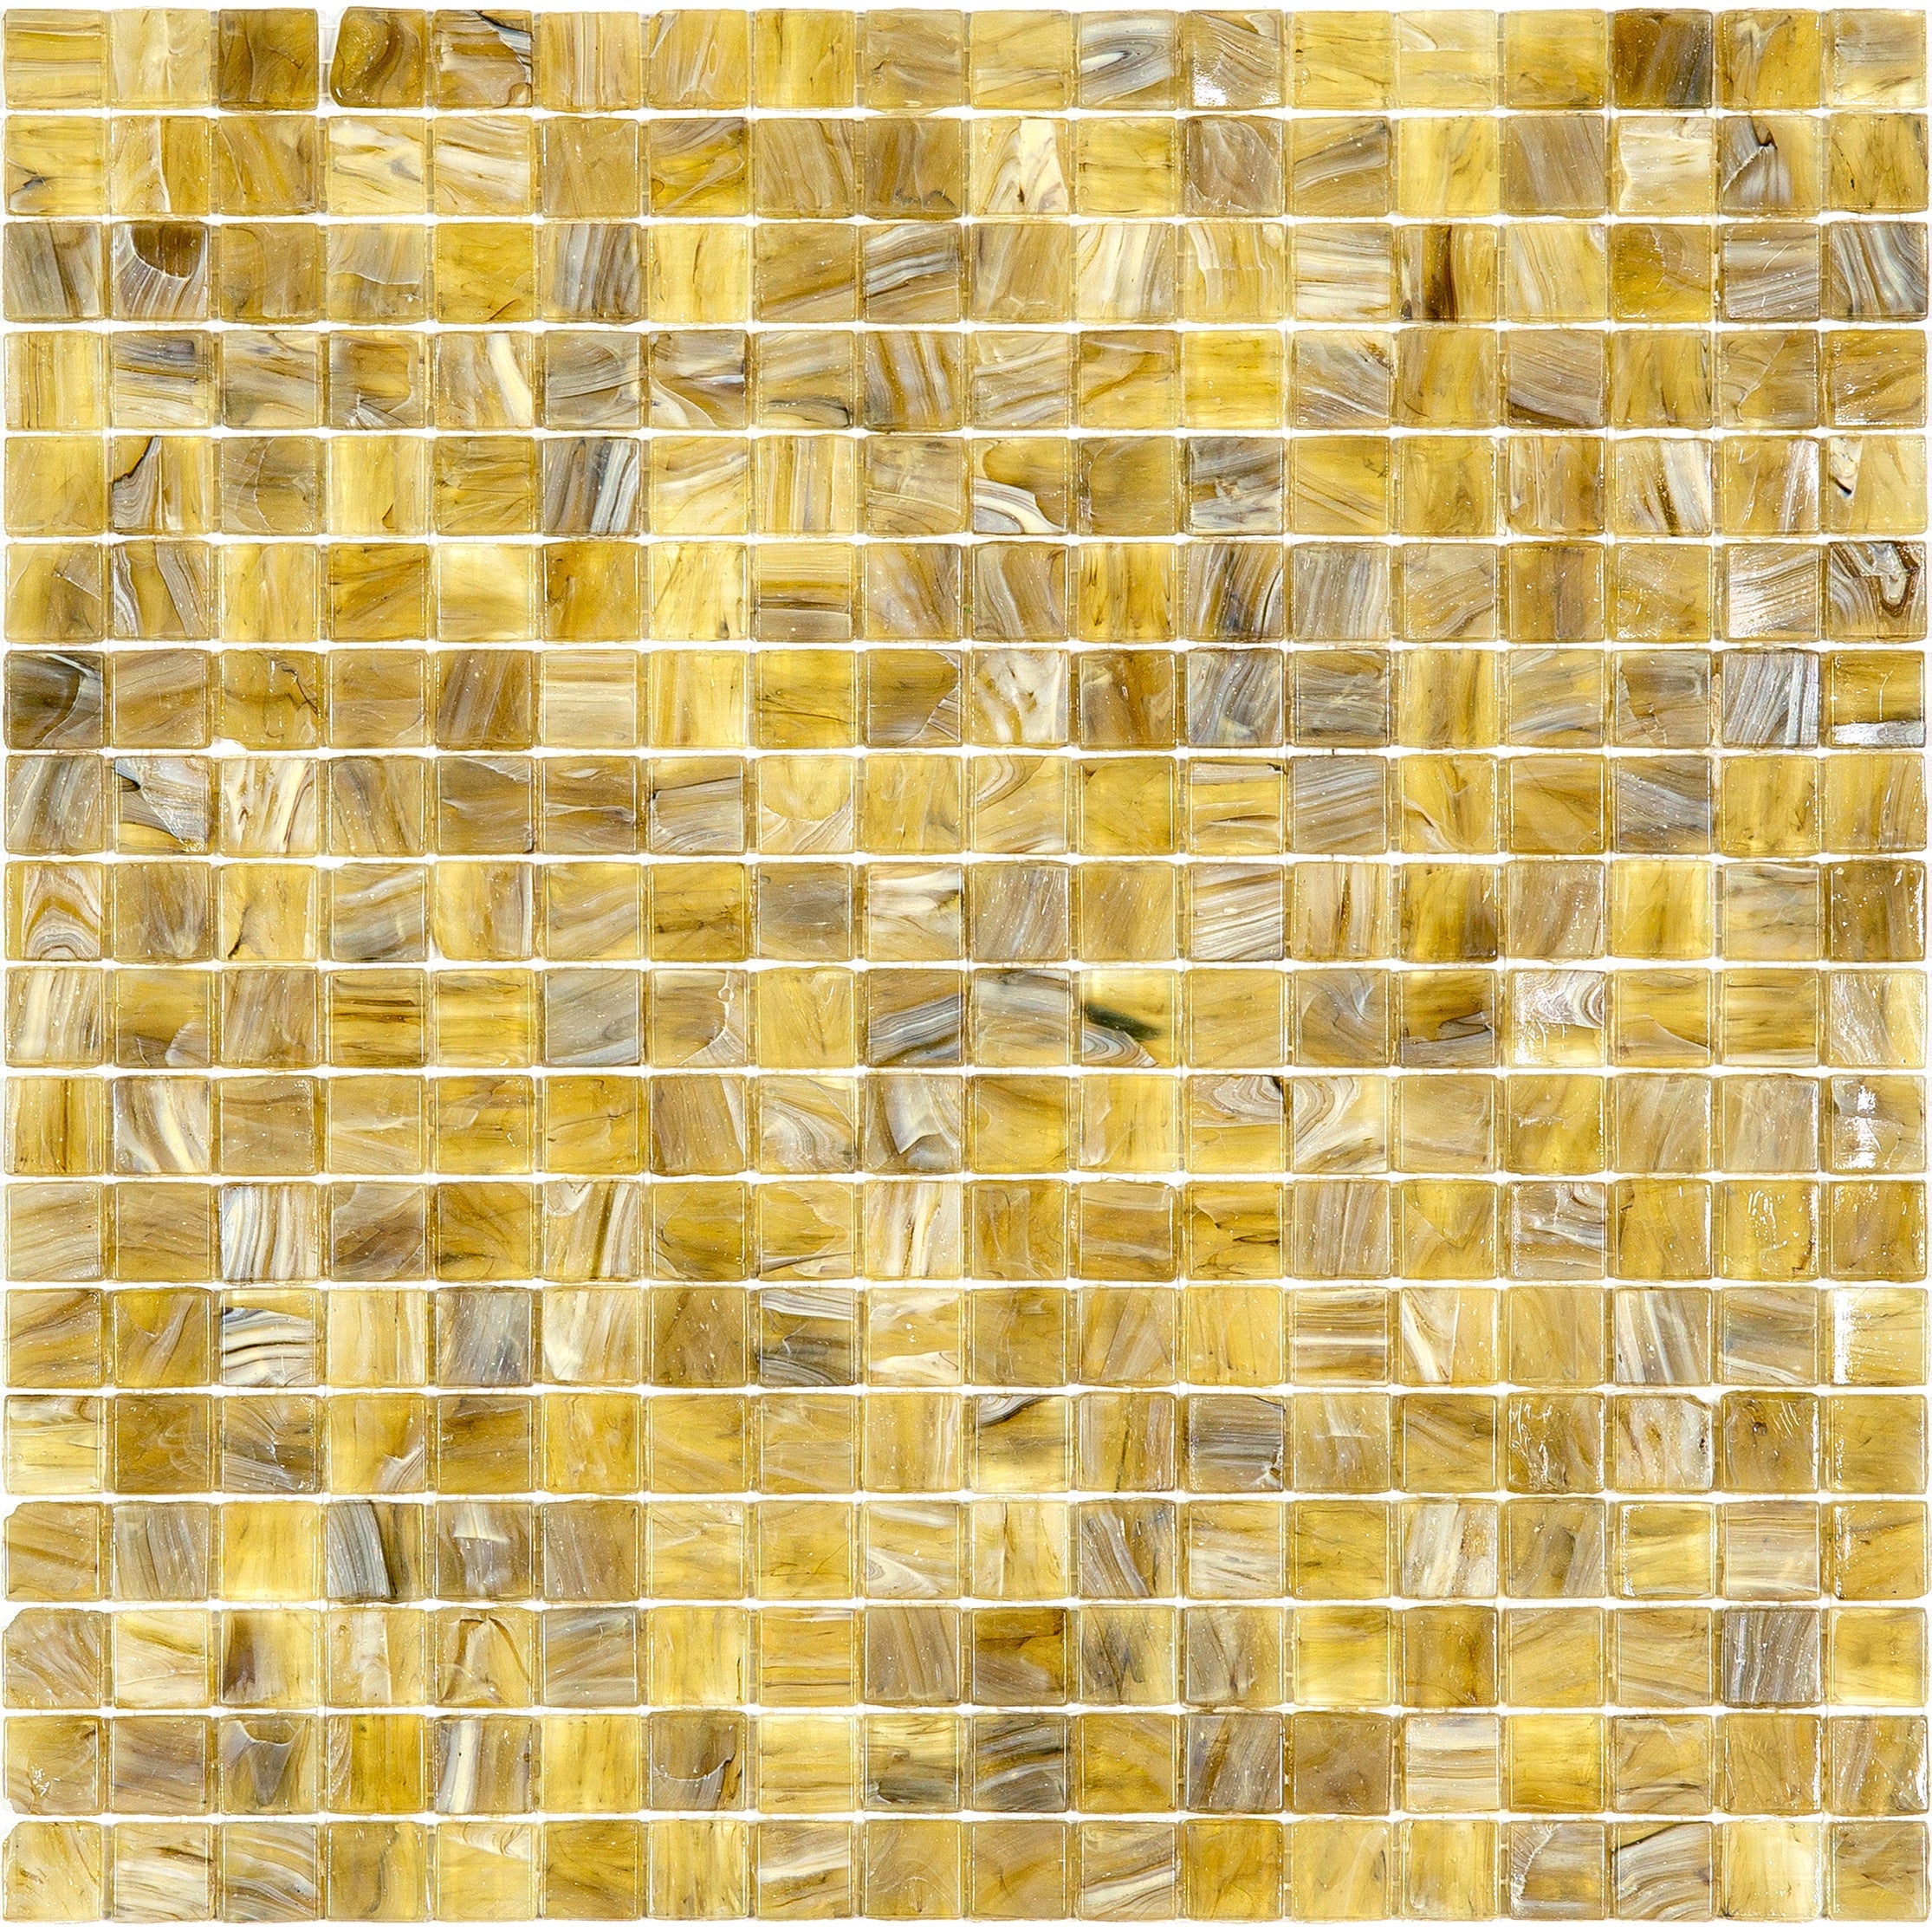 mir alma solid colors 0_6 inch nibble mn647 wall and floor mosaic distributed by surface group natural materials